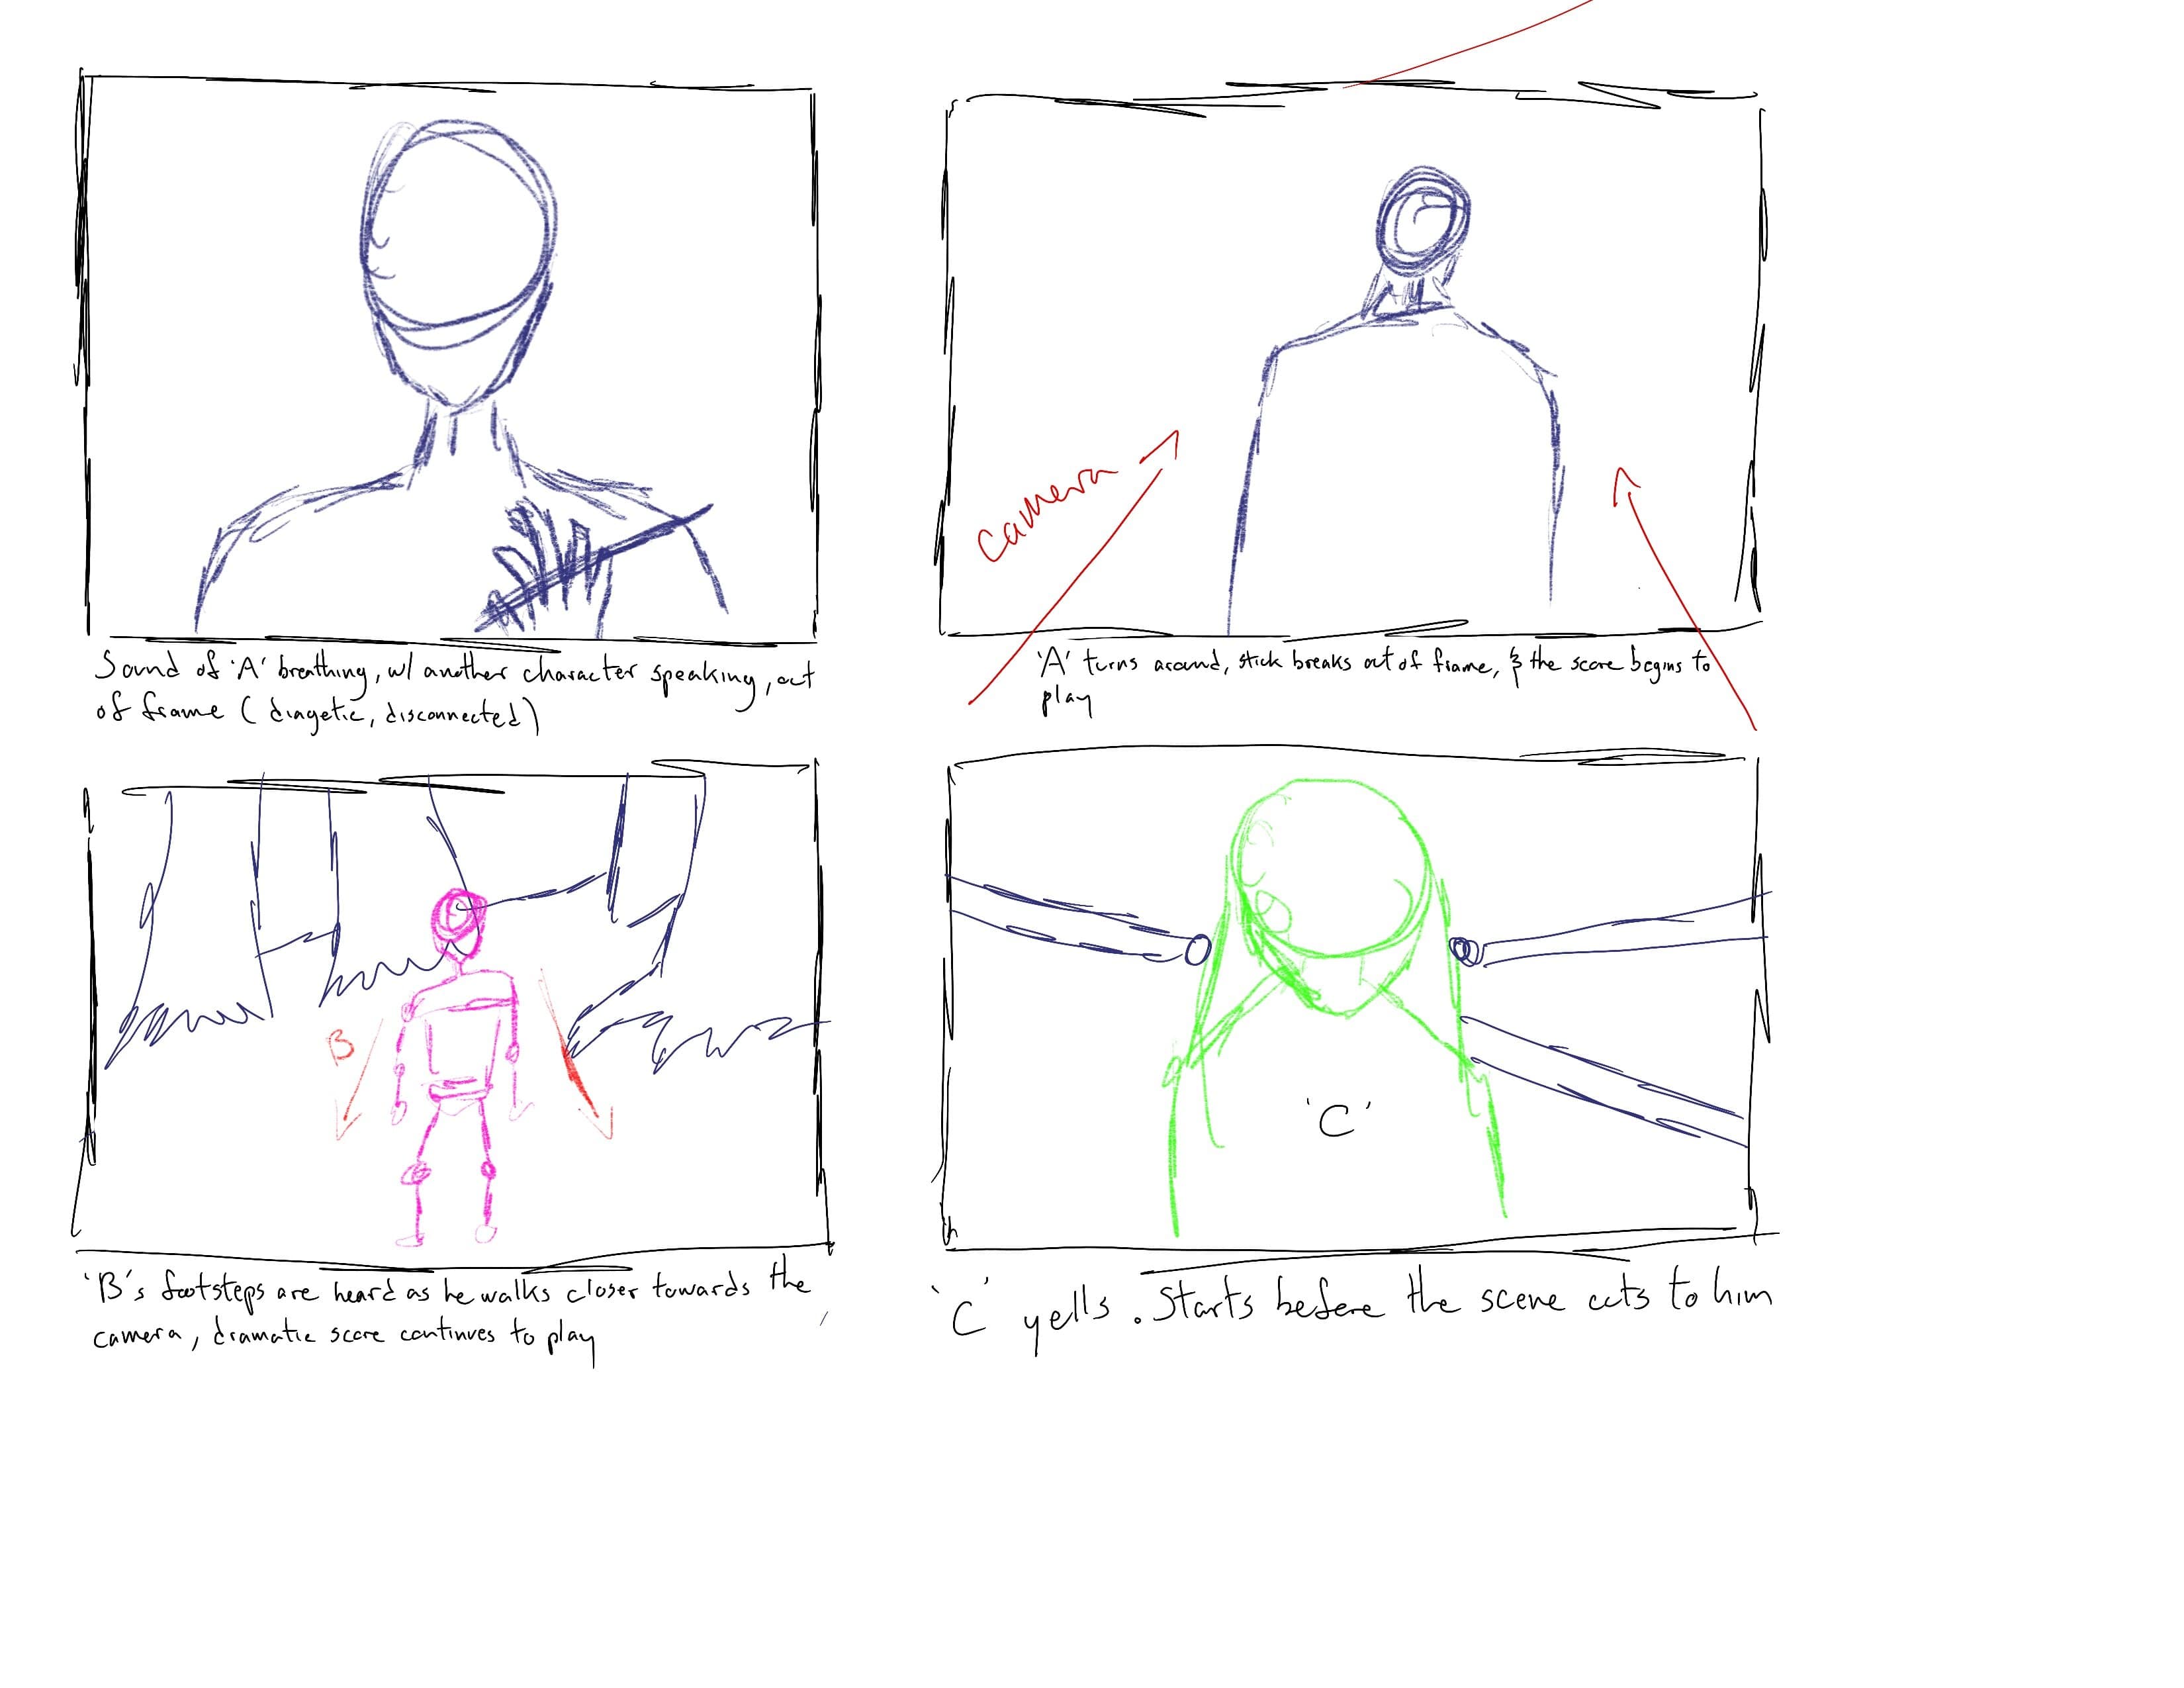 storyboard of a sequence in the film